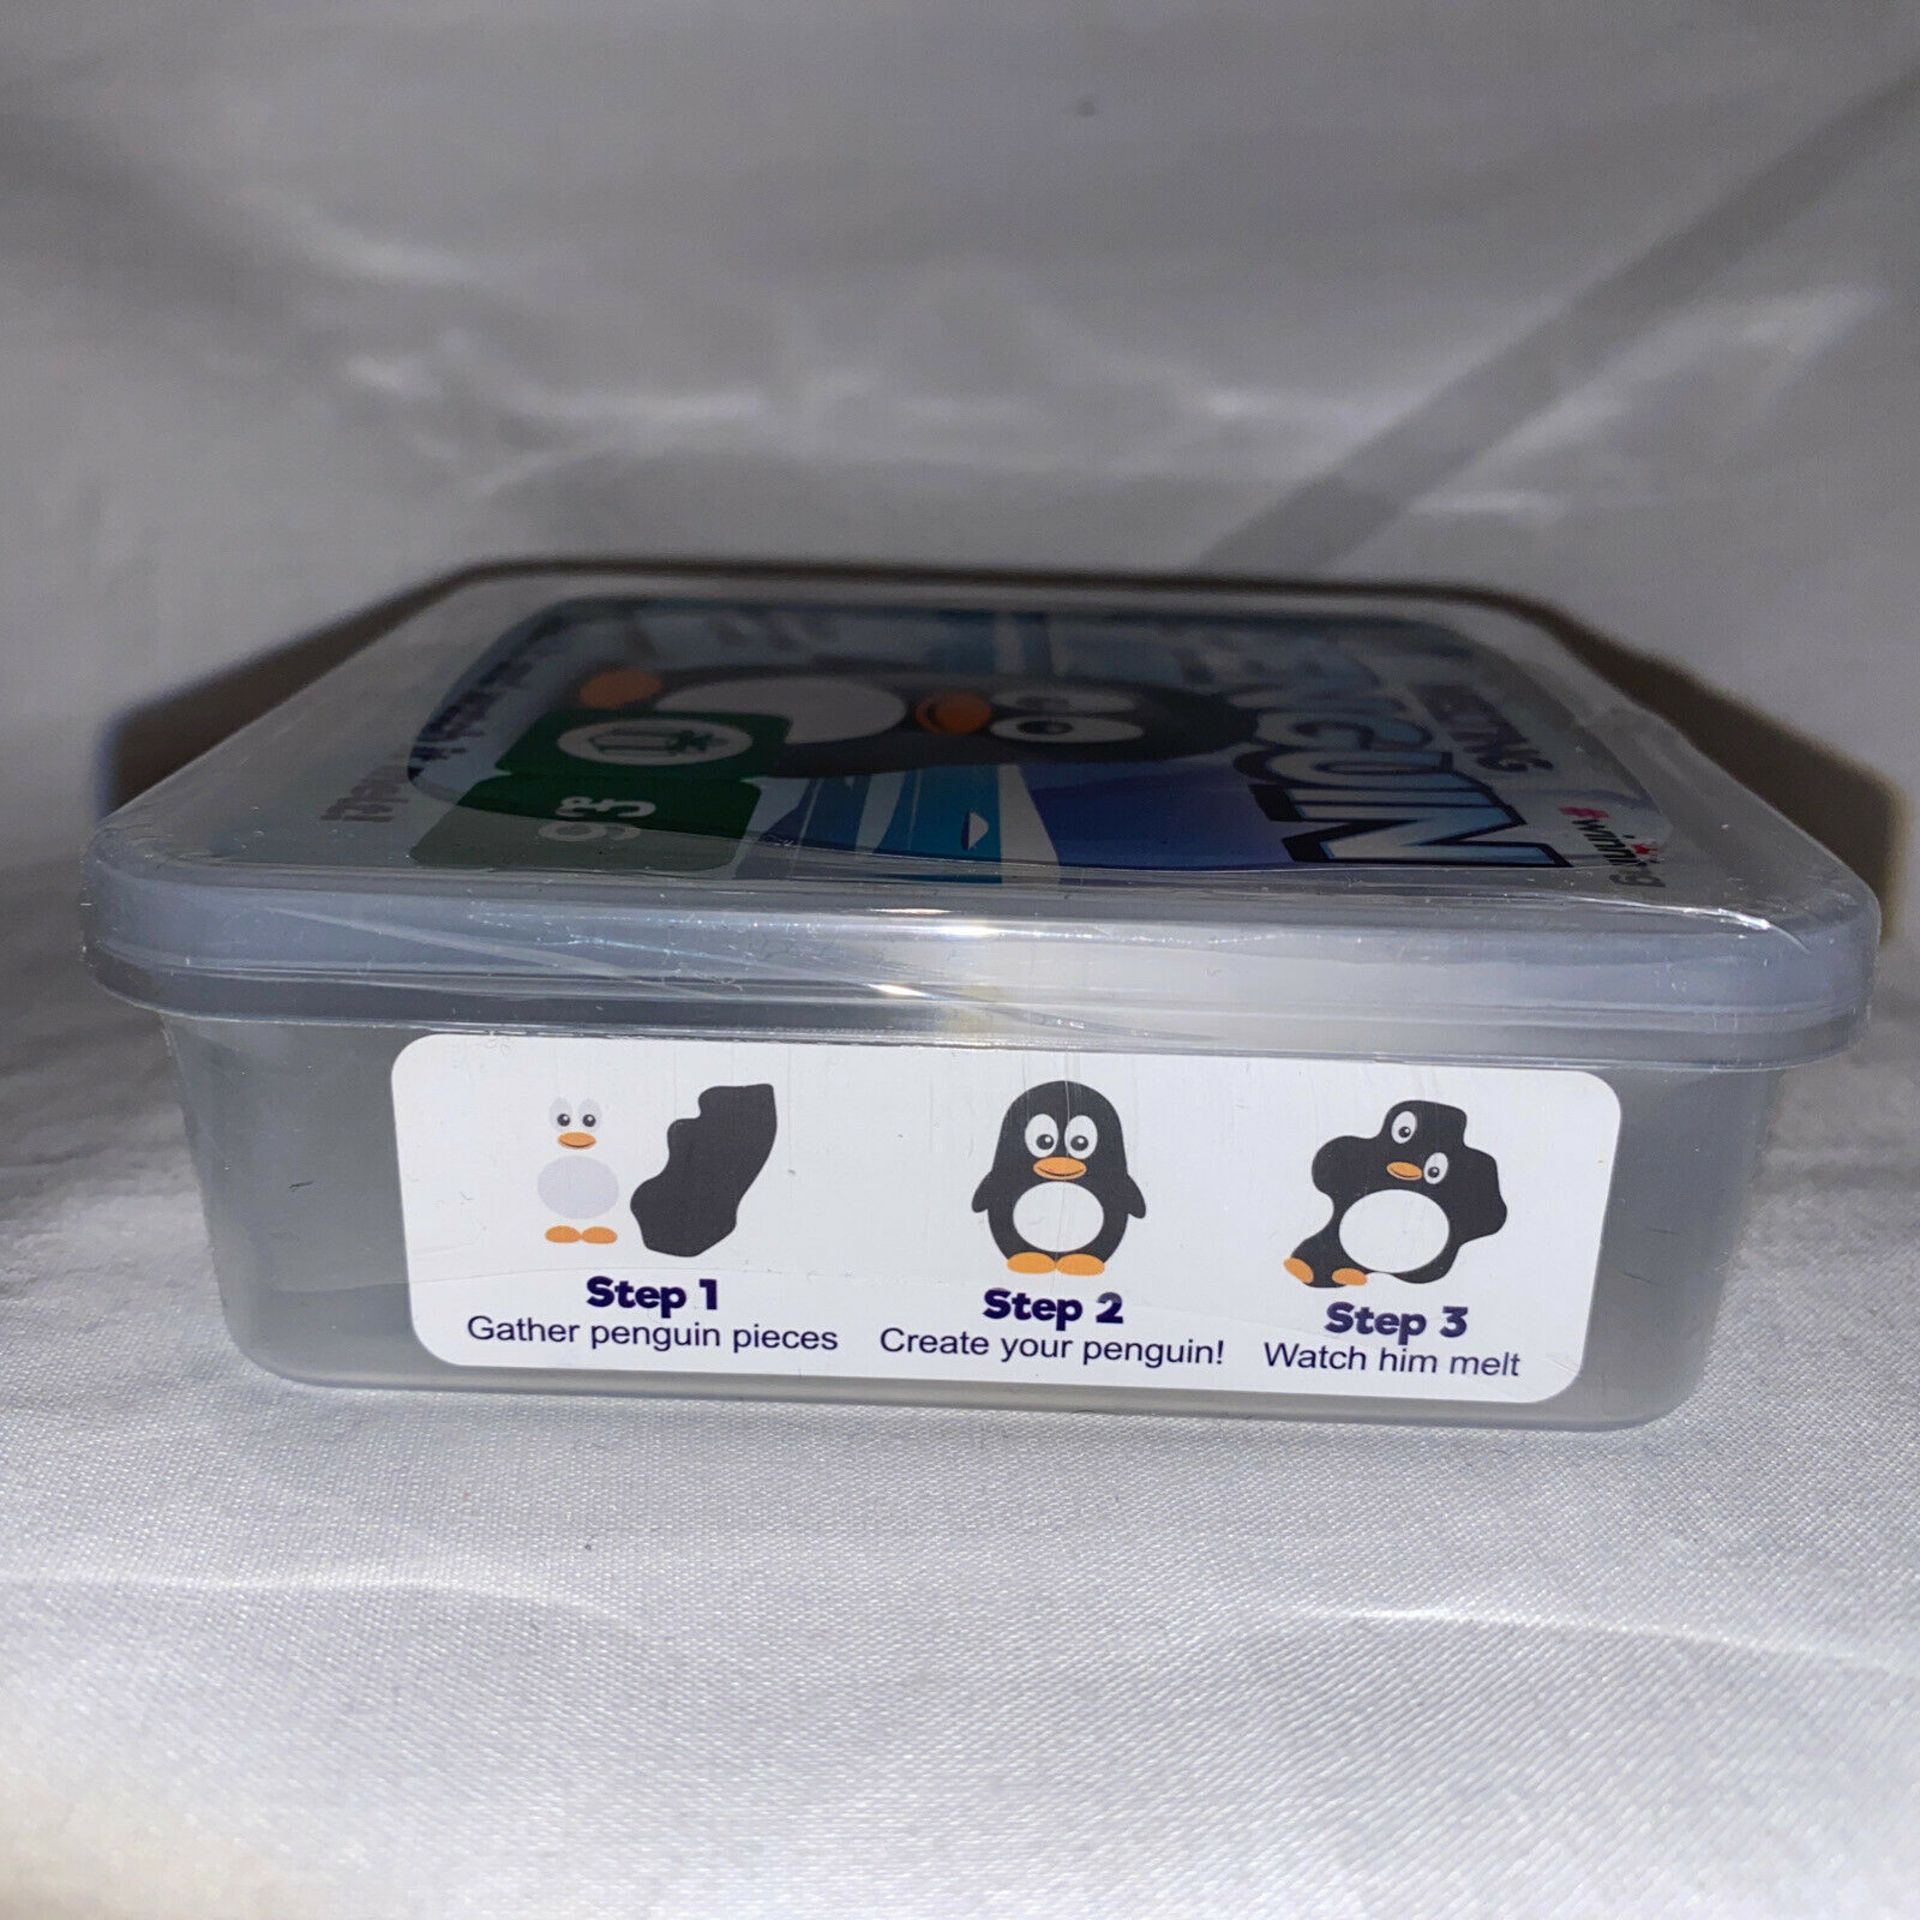 10 x melting penguin putty winning melts again & again christmas gift total rrp£60 - Image 3 of 3